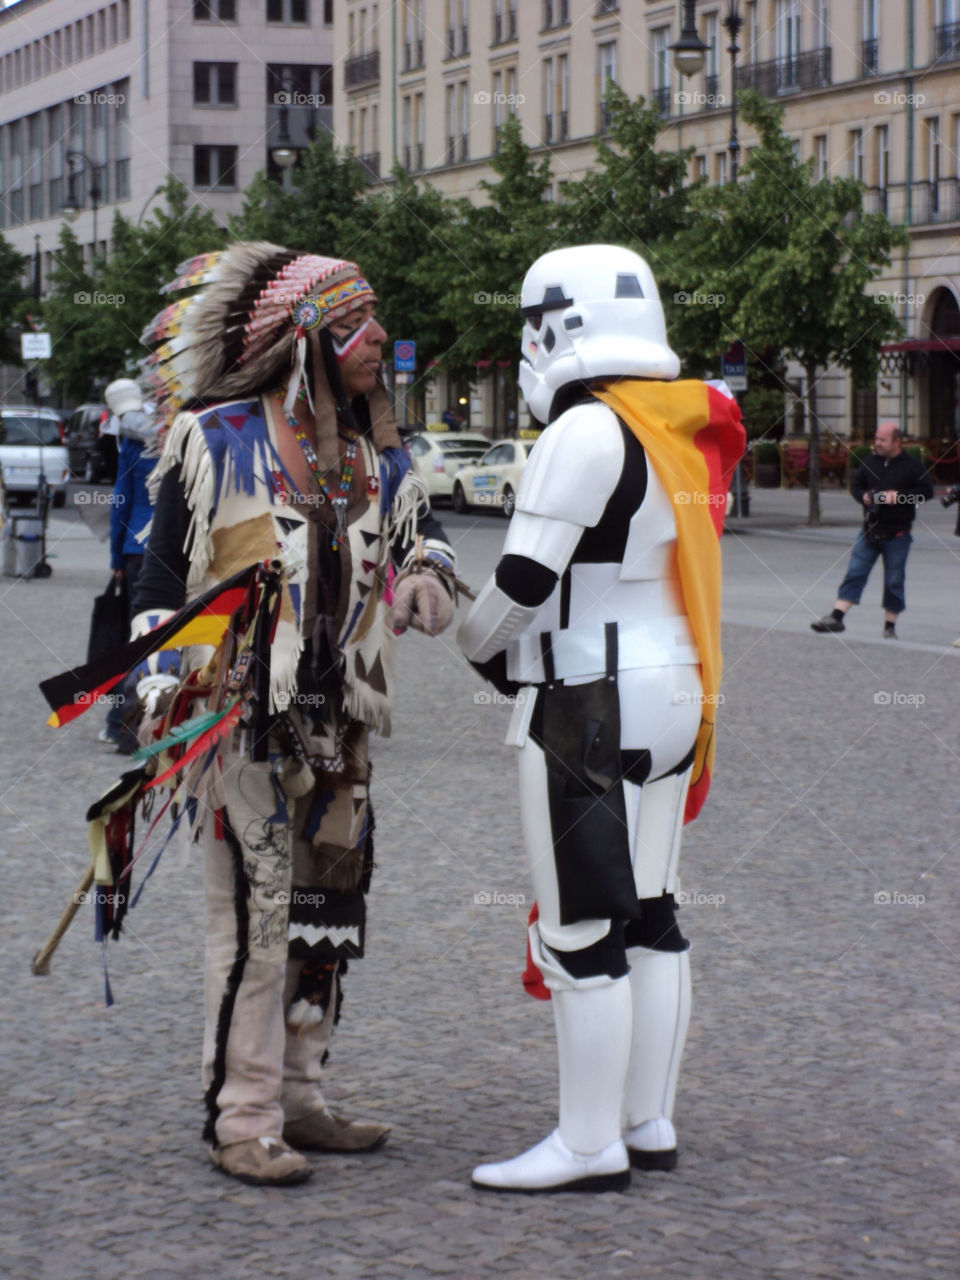 berlin how. have you seen my horse funny. i cannot find darth vader by martin.dickson.3